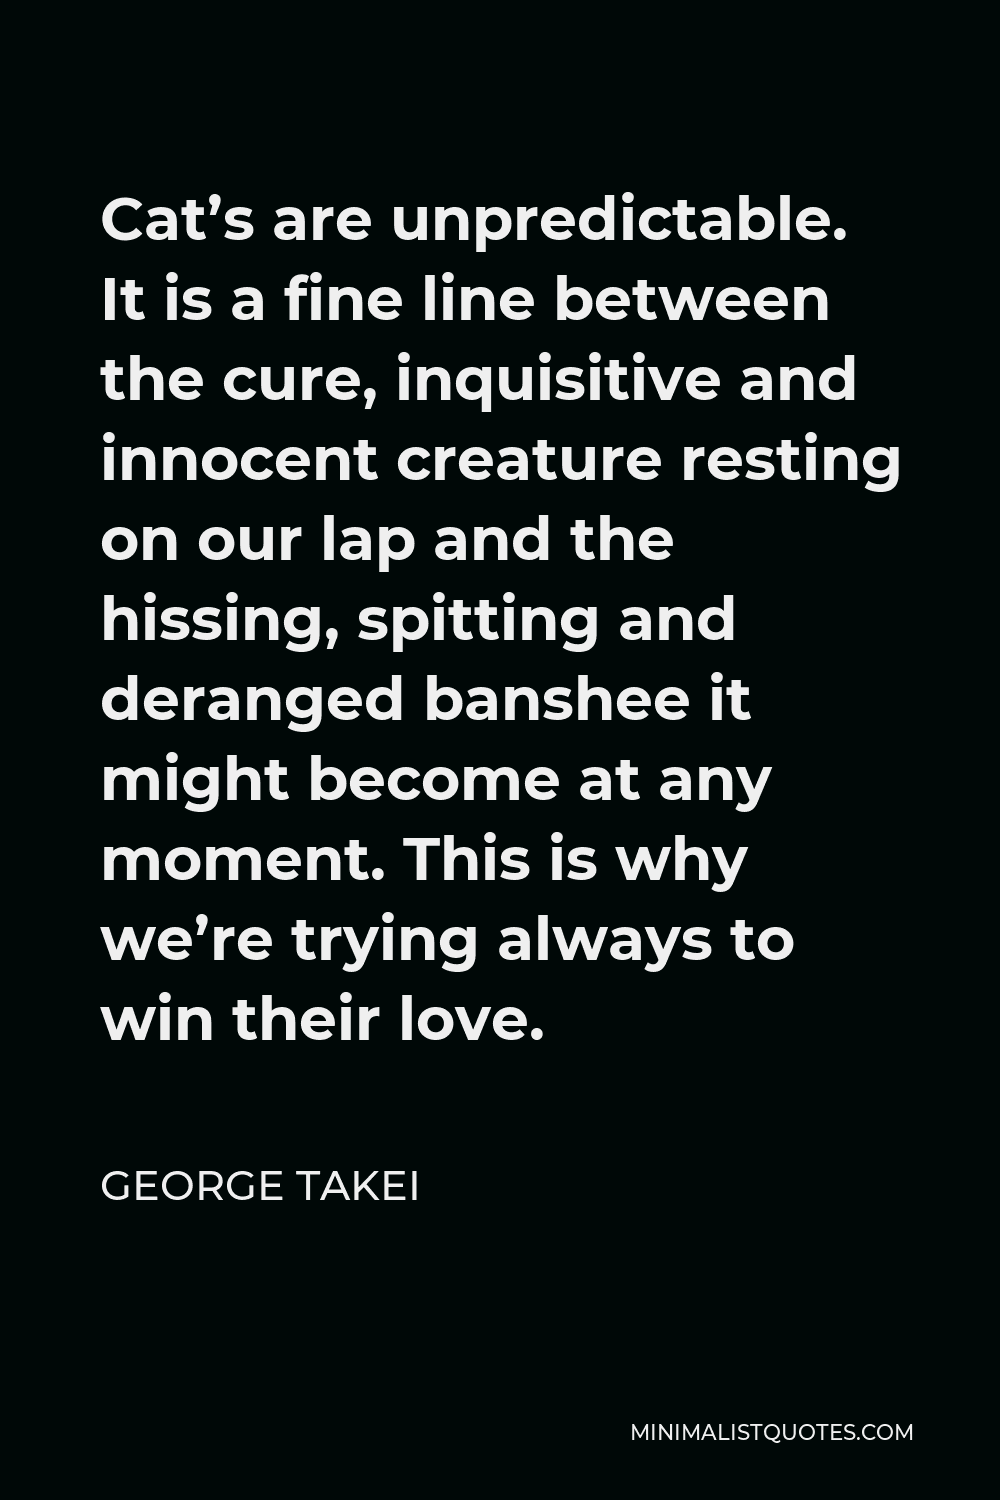 George Takei Quote - Cat’s are unpredictable. It is a fine line between the cure, inquisitive and innocent creature resting on our lap and the hissing, spitting and deranged banshee it might become at any moment. This is why we’re trying always to win their love.